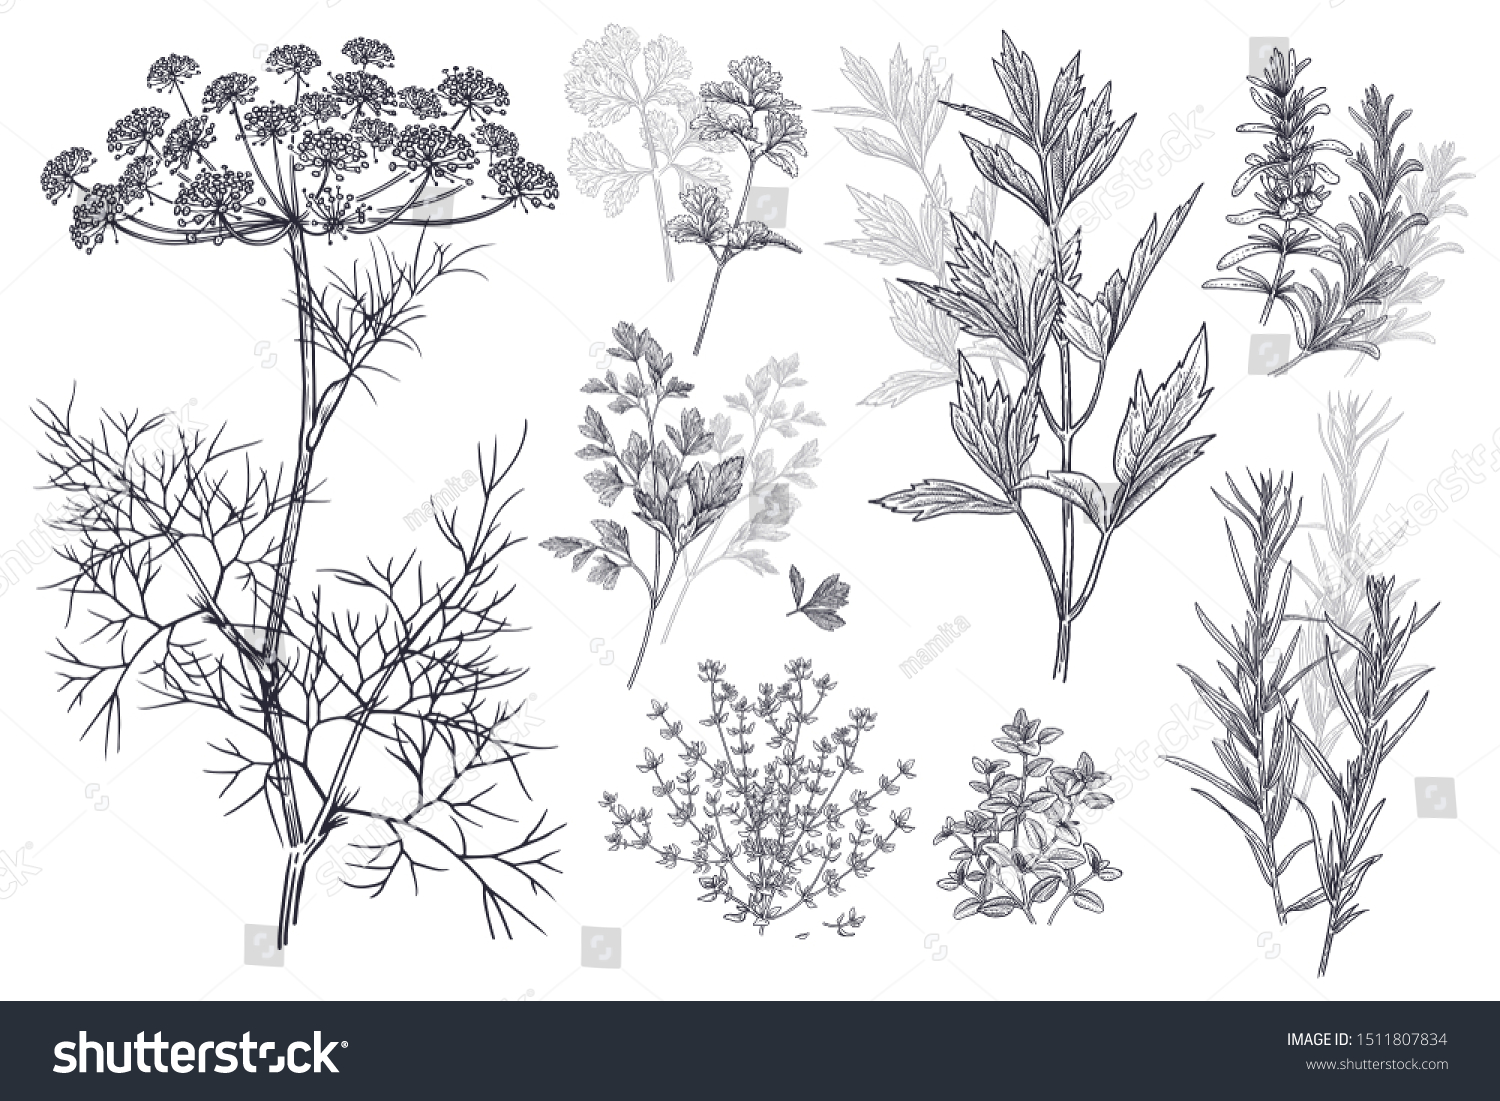 Dill, coriander or cilantro, thyme, parsley, lovage, estragon or tarragon, rosemary. Illustration of garden fragrant herbs. Spice for flavouring food. Isolated black plant on white background. Vector. #1511807834